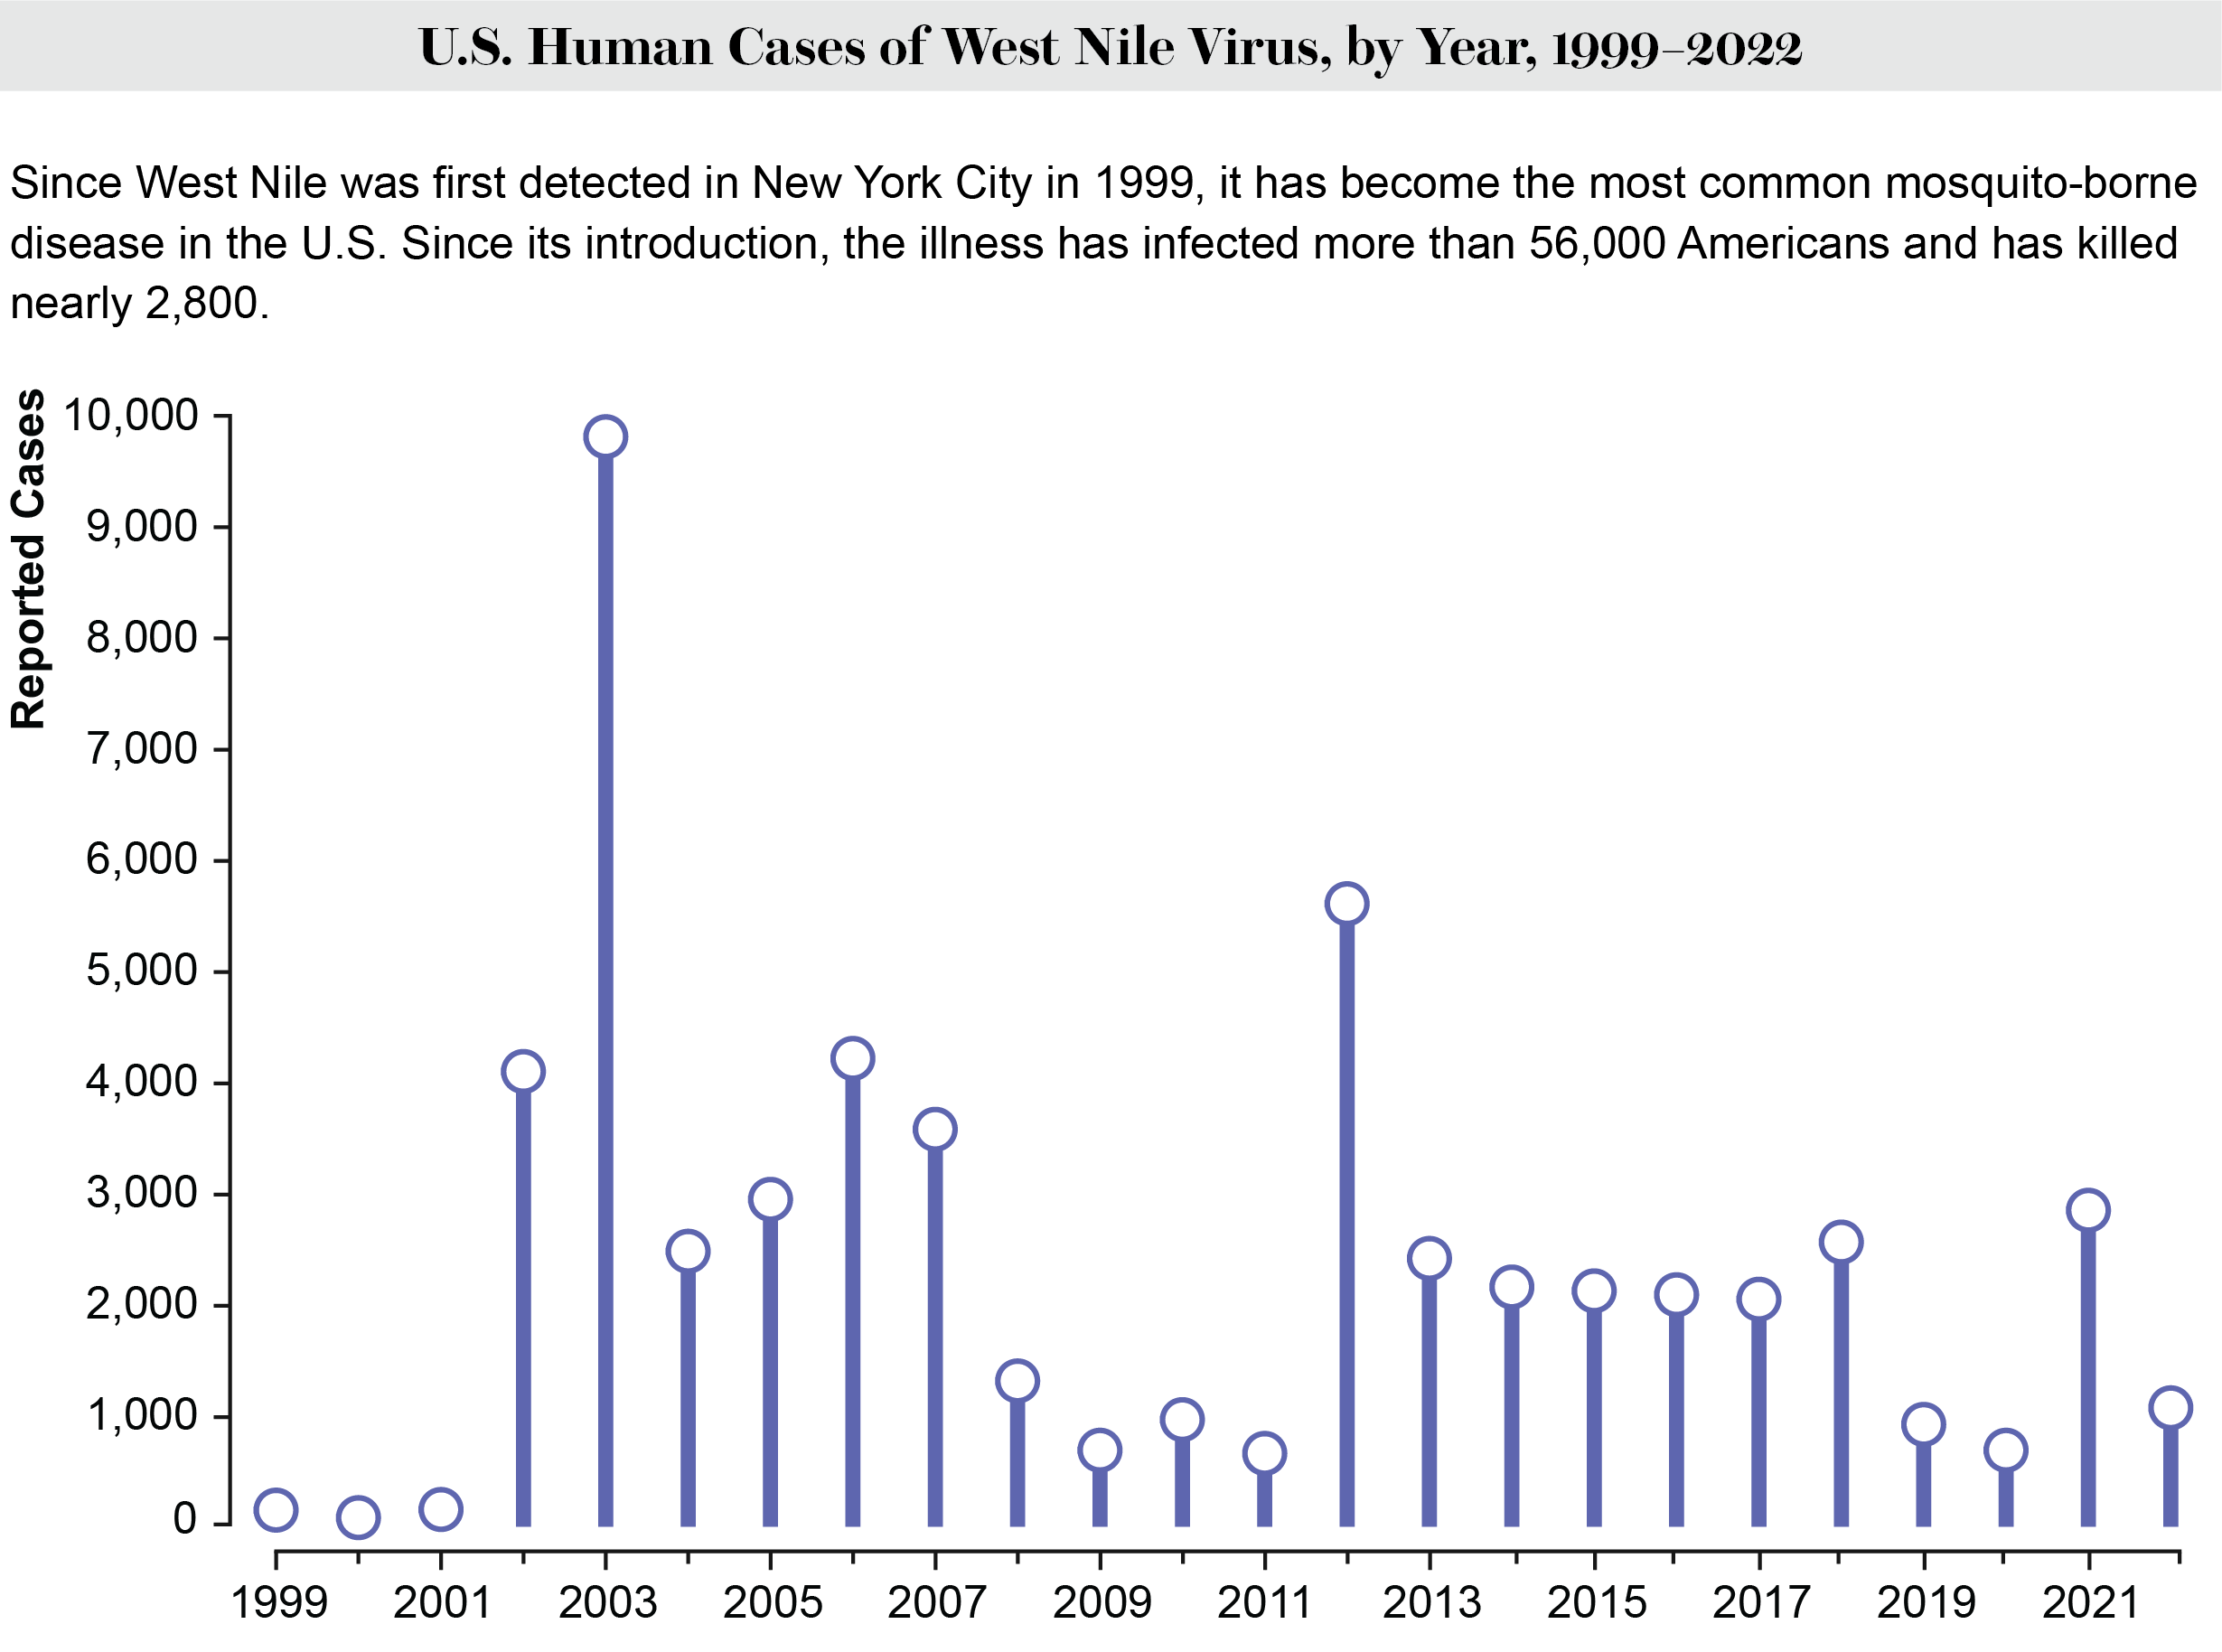 A bar graph shows the yearly reported cases of West Nile virus in the U.S. from 1999 to 2022.